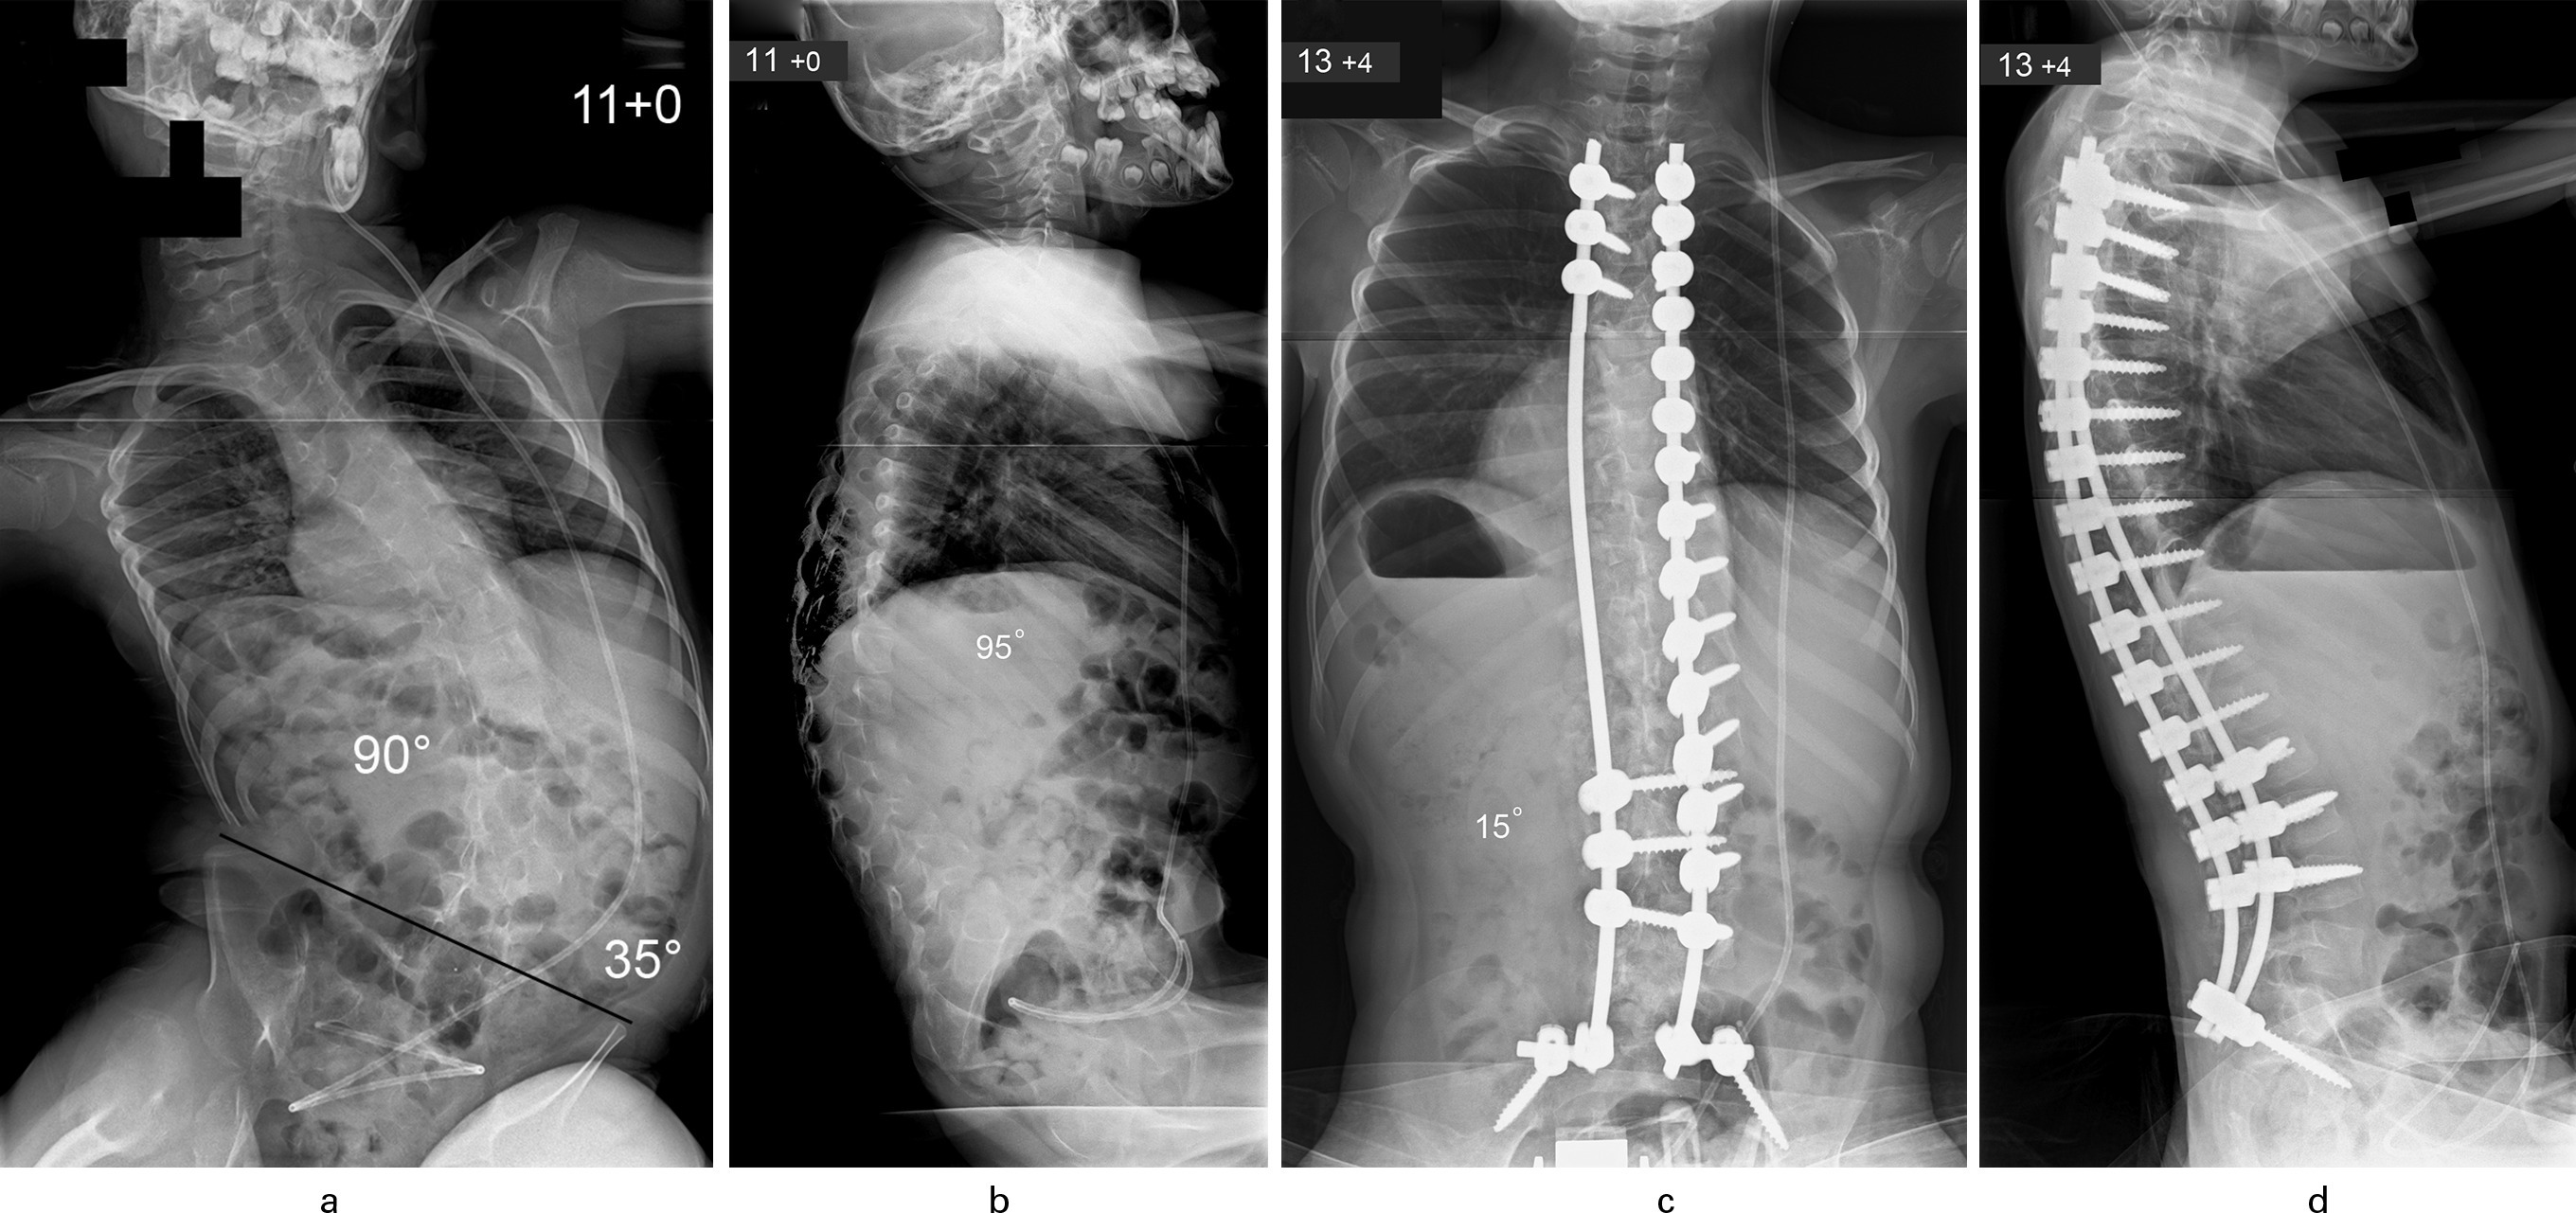 Fig. 1 
            Patient aged 11 years with congenital encephalopathy, hydrocephalus, and total body cerebral palsy. a) Typical long C-shaped collapsing thoracolumbar scoliosis (90o) with associated severe pelvic obliquity (35o); b) Thoracolumbar kyphosis producing positive global sagittal balance of the spine. c) Excellent correction of scoliosis to 15o and levelling of the pelvis was achieved through a posterior spinal fusion using segmental pedicle screw/rod instrumentation (aged 13 years and four months). d) Restoration of normal thoracic kyphosis and lumbar lordosis with adequate global sagittal balance noted after spinal surgery.
          